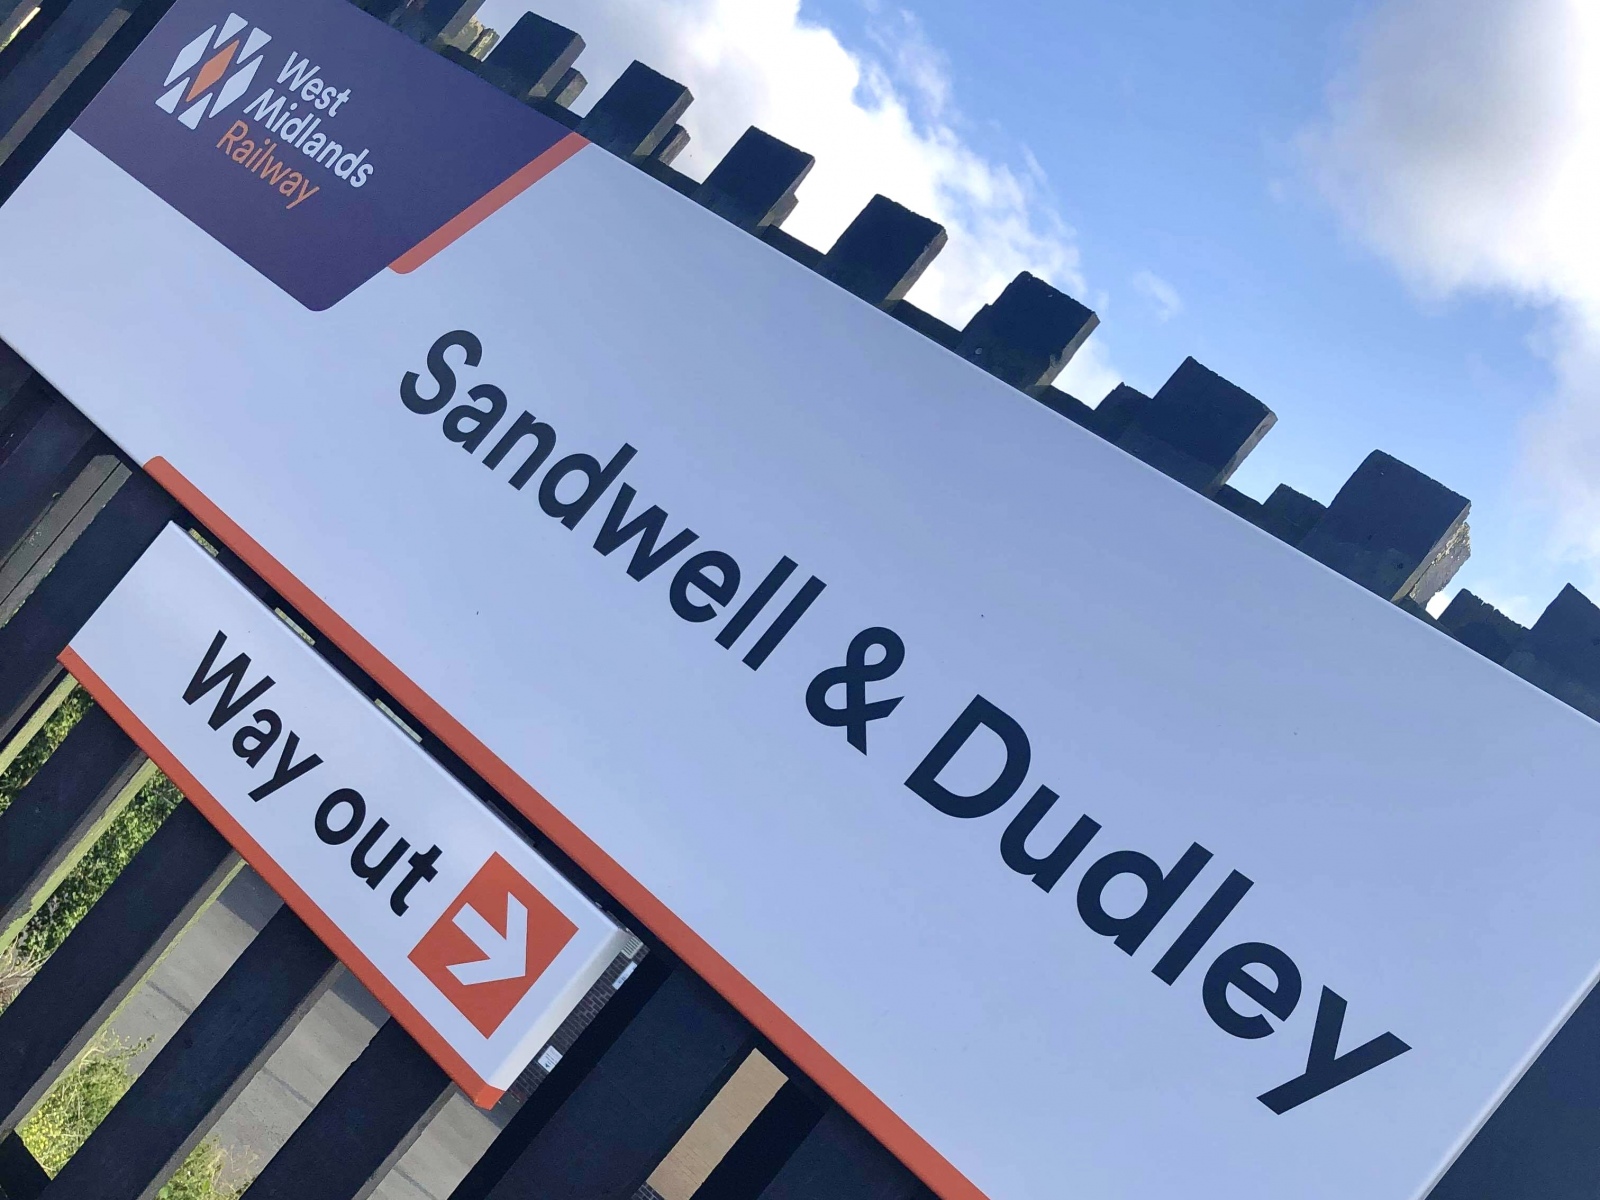 Sandwell and Dudley Railway Station